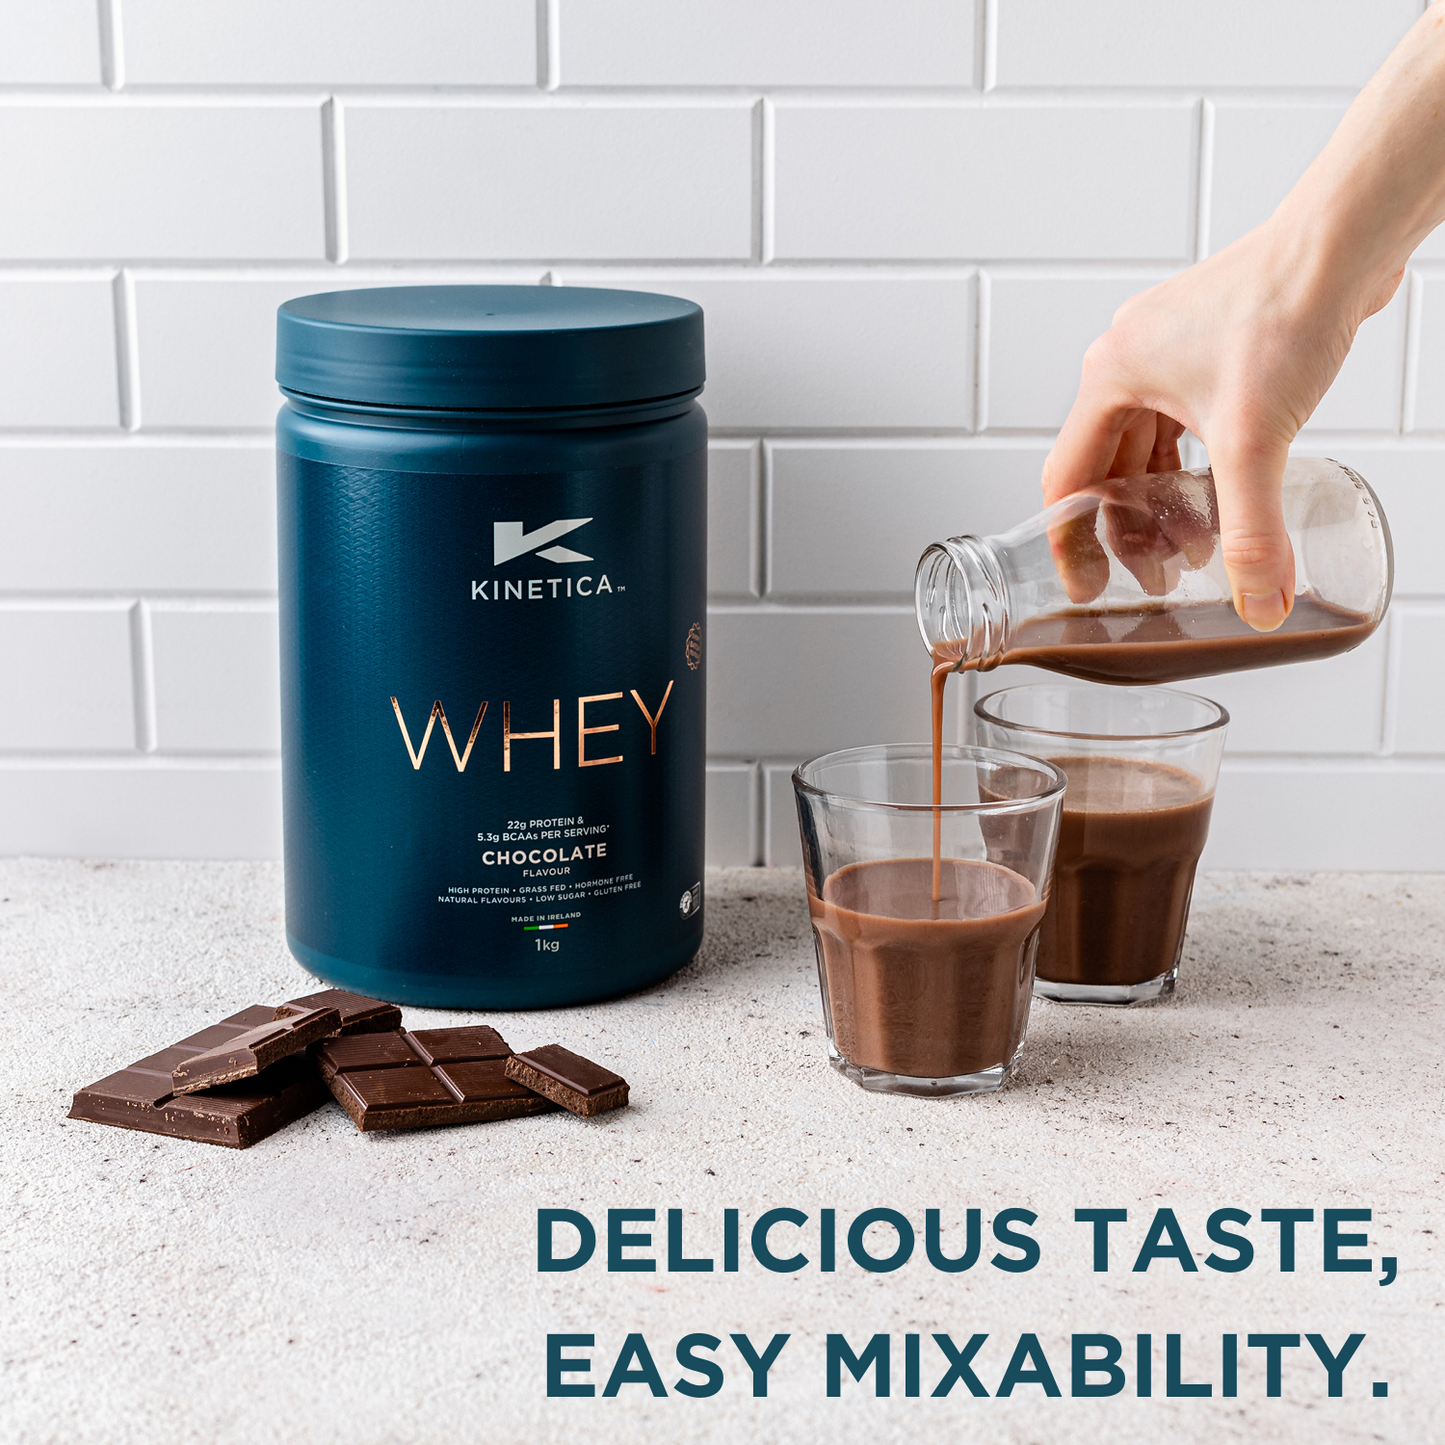 Whey protein powder, chocolate protein powder, trusted by professional athletes, WADA tested, high protein, delicious taste 